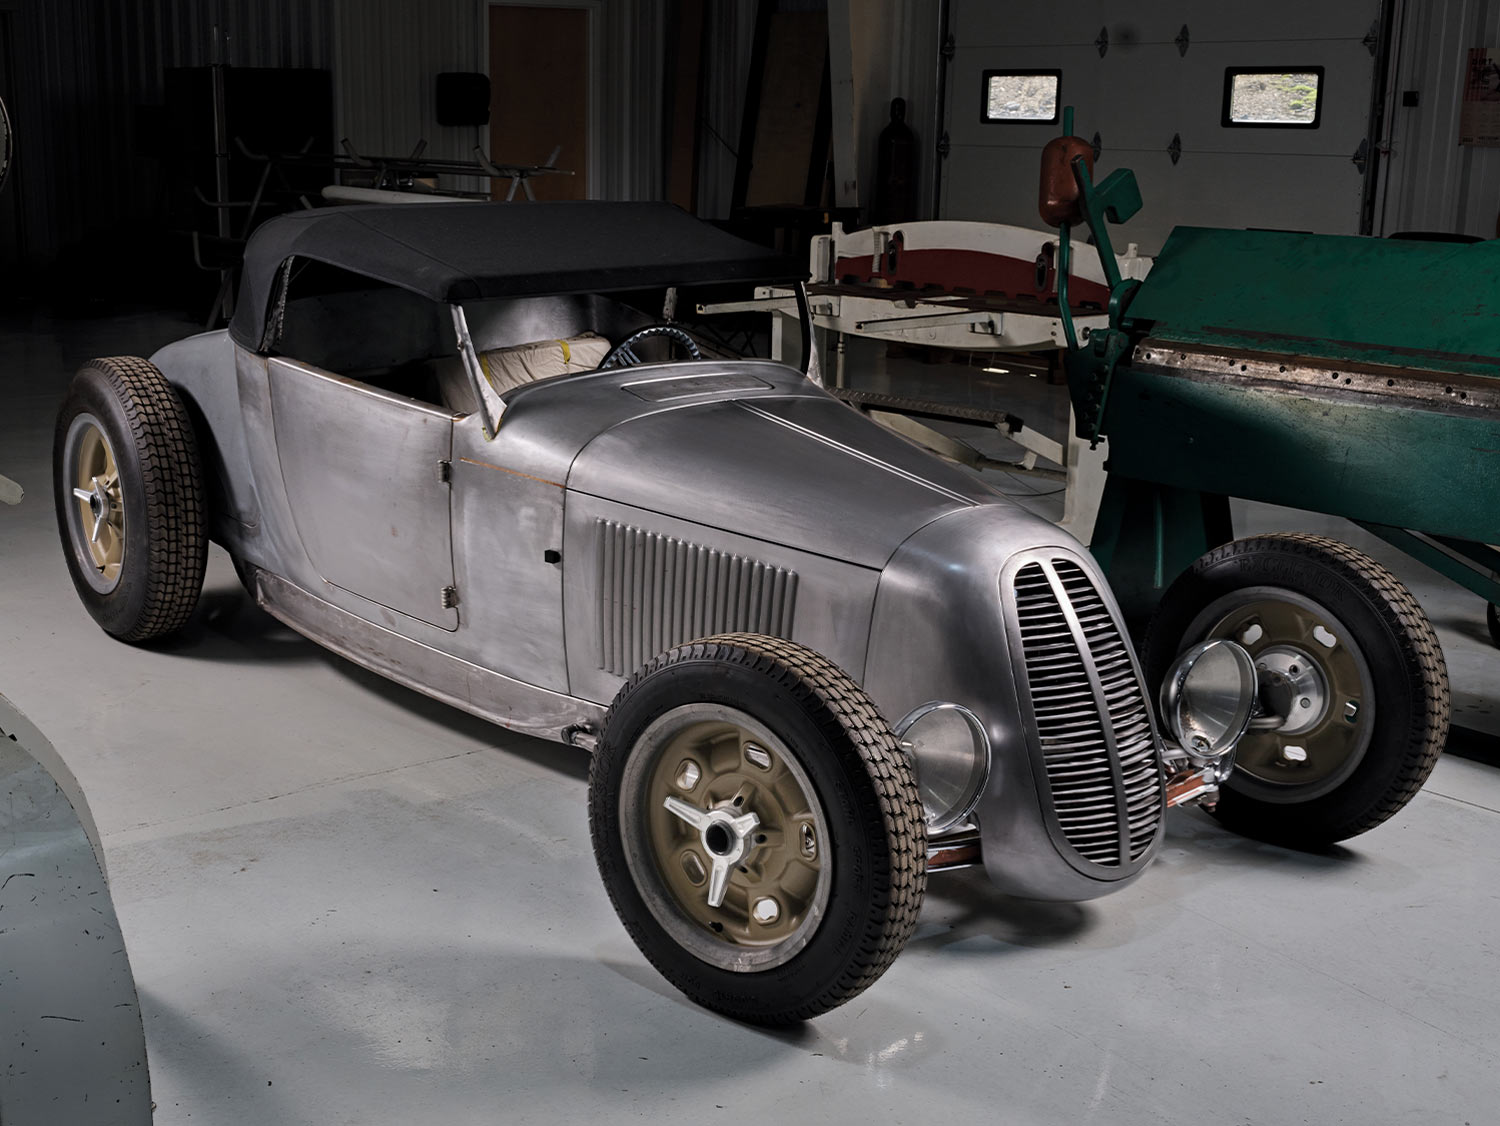 three quarter passenger side view of the paint-bare '27 Ford Highboy Roadster parked in a closed garage